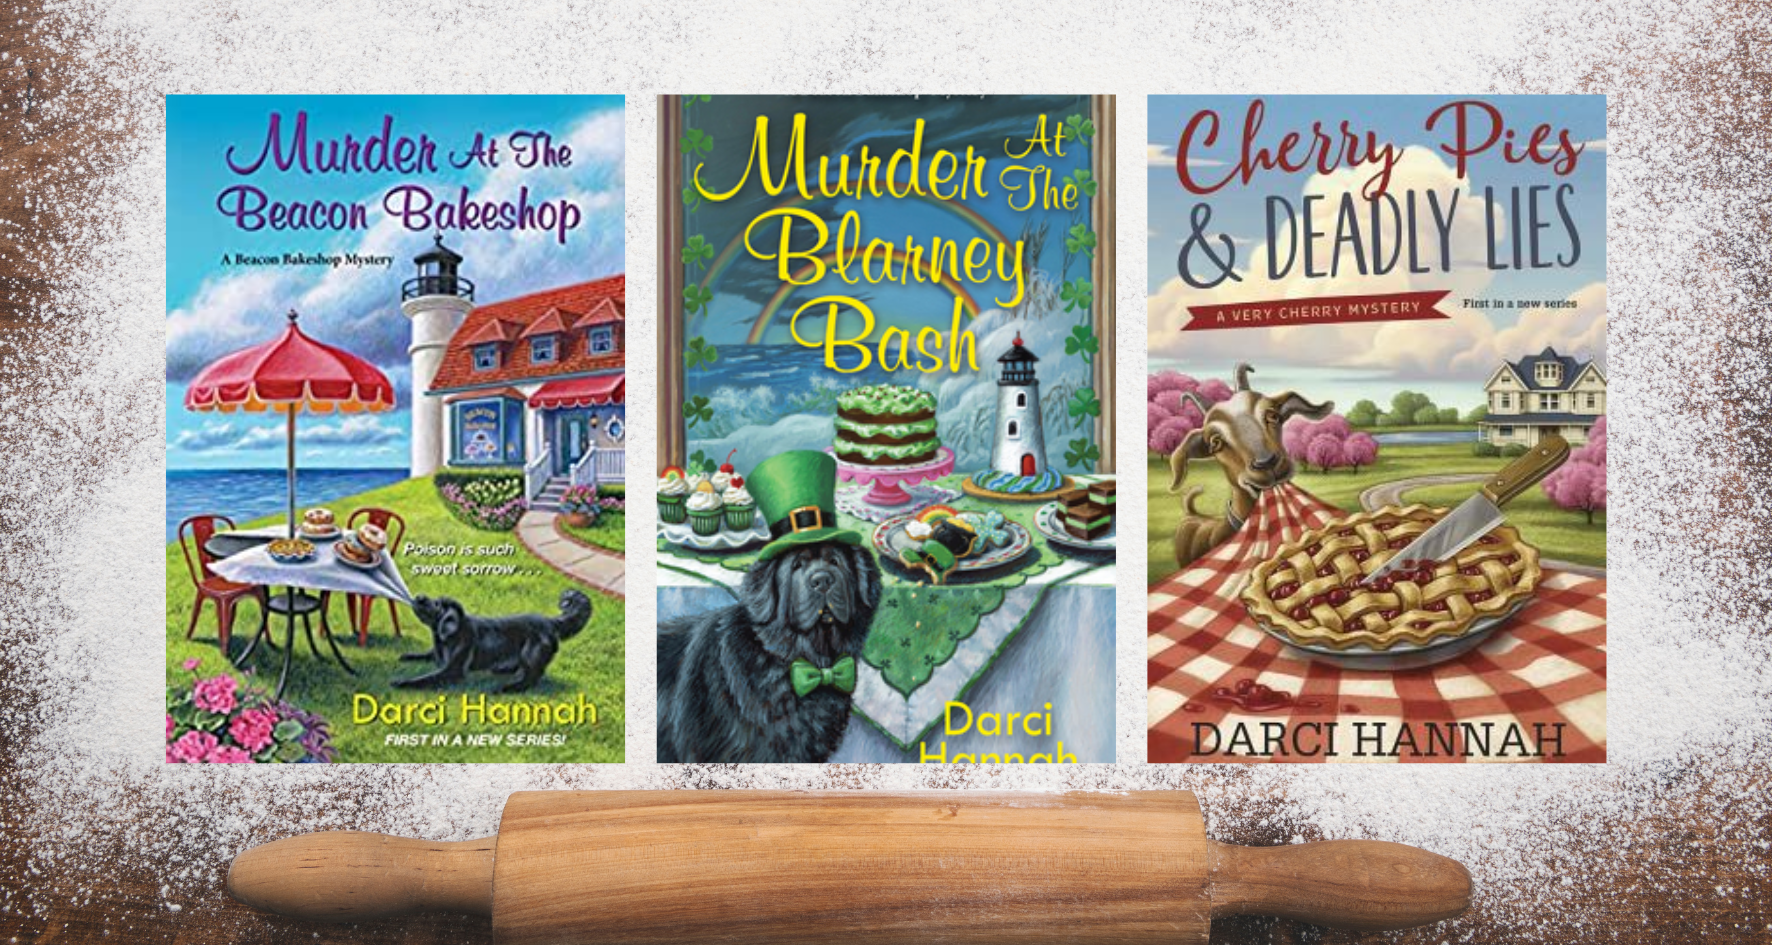 Covers for Murder at the Beacon Bakeshop, Murder at the Blarney Bash and Cherry Pies and Deadly Lies